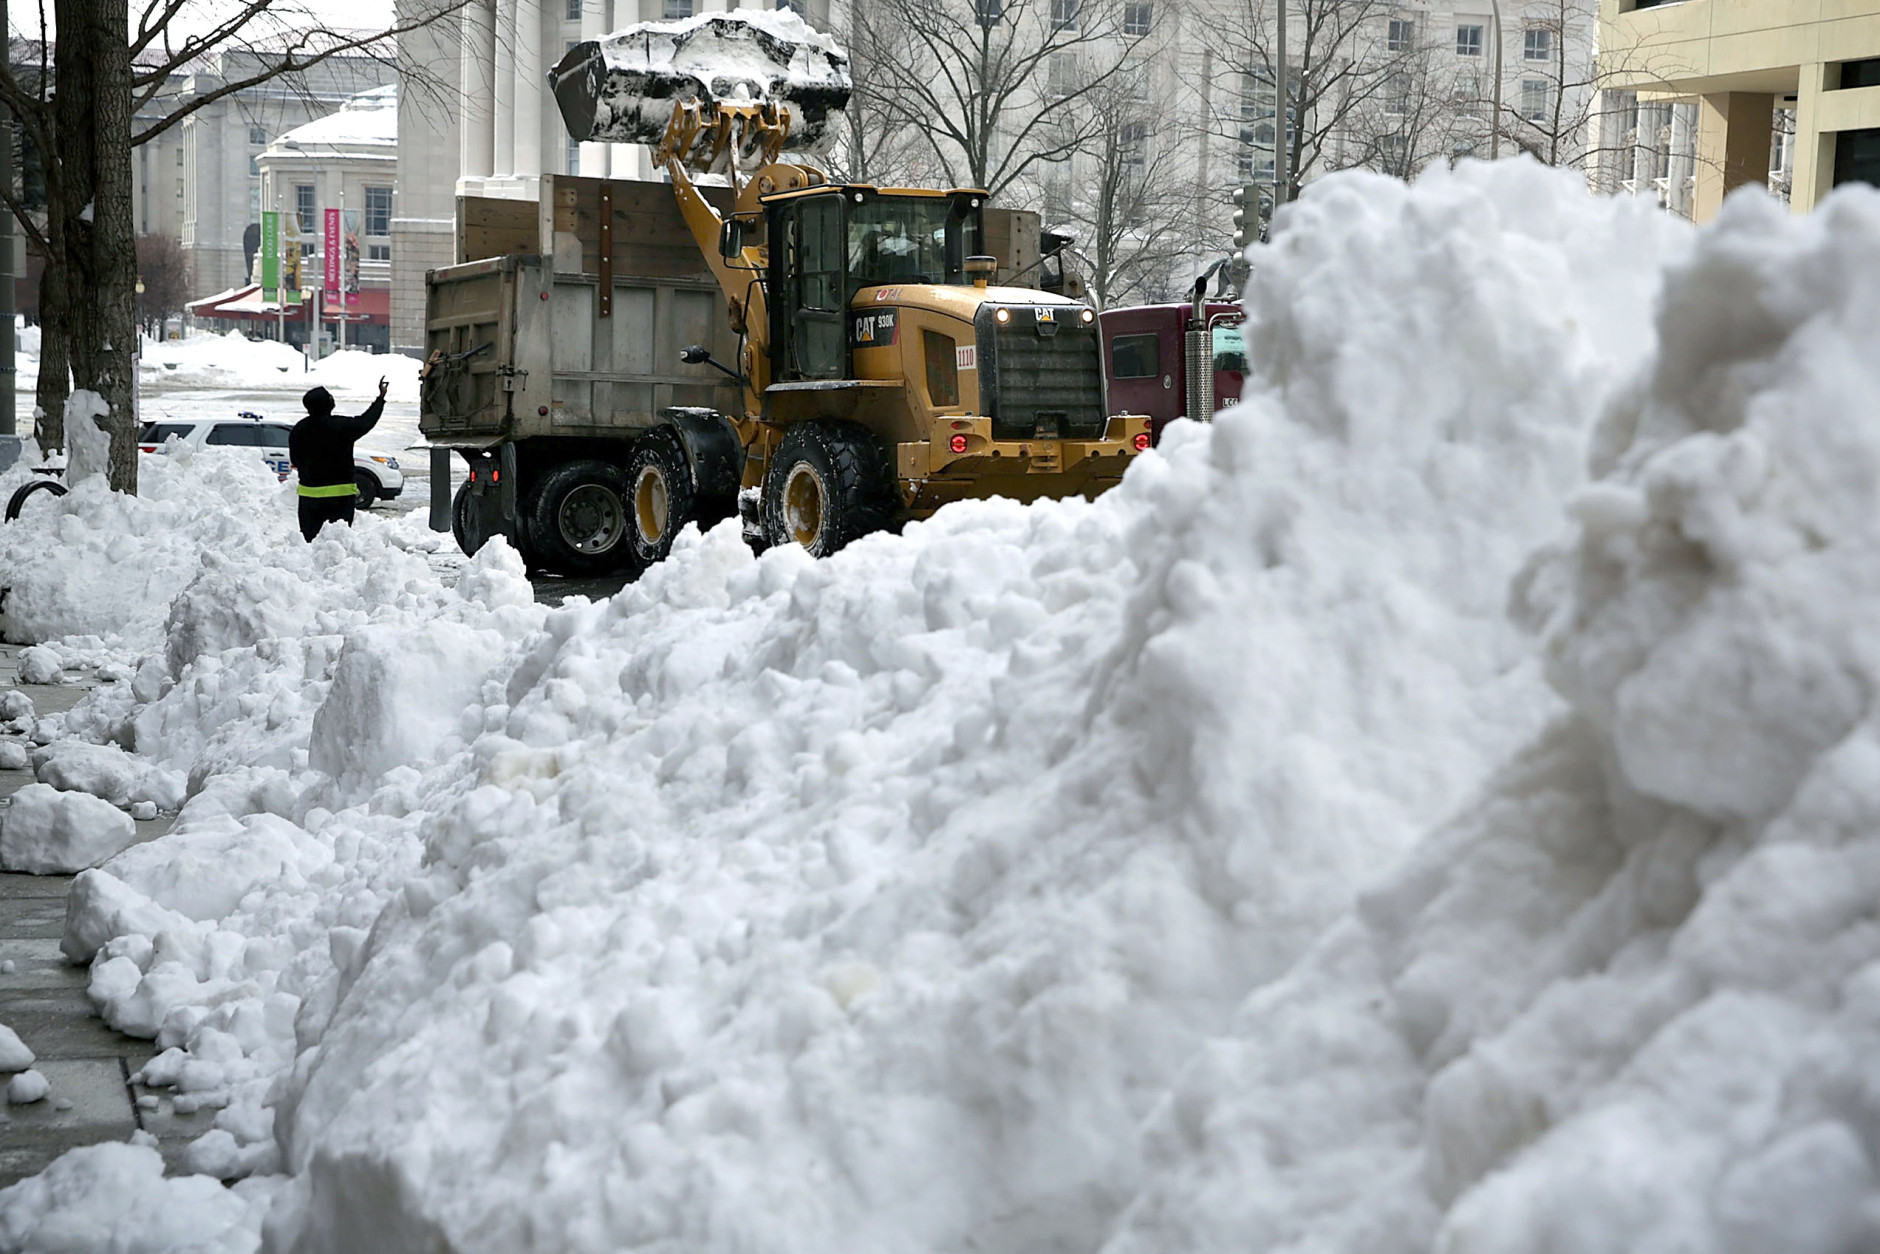 WASHINGTON, DC - JANUARY 25:  A front end loader unloads snow onto a truck on 13th street January 25, 2016 in Washington, DC. Winter Storm Jonas hit the East Coast over the weekend, breaking snowfall records, causing 29 storm-related deaths, leaving thousands of homes without power and serious flooding in coastal areas.   (Photo by Alex Wong/Getty Images)